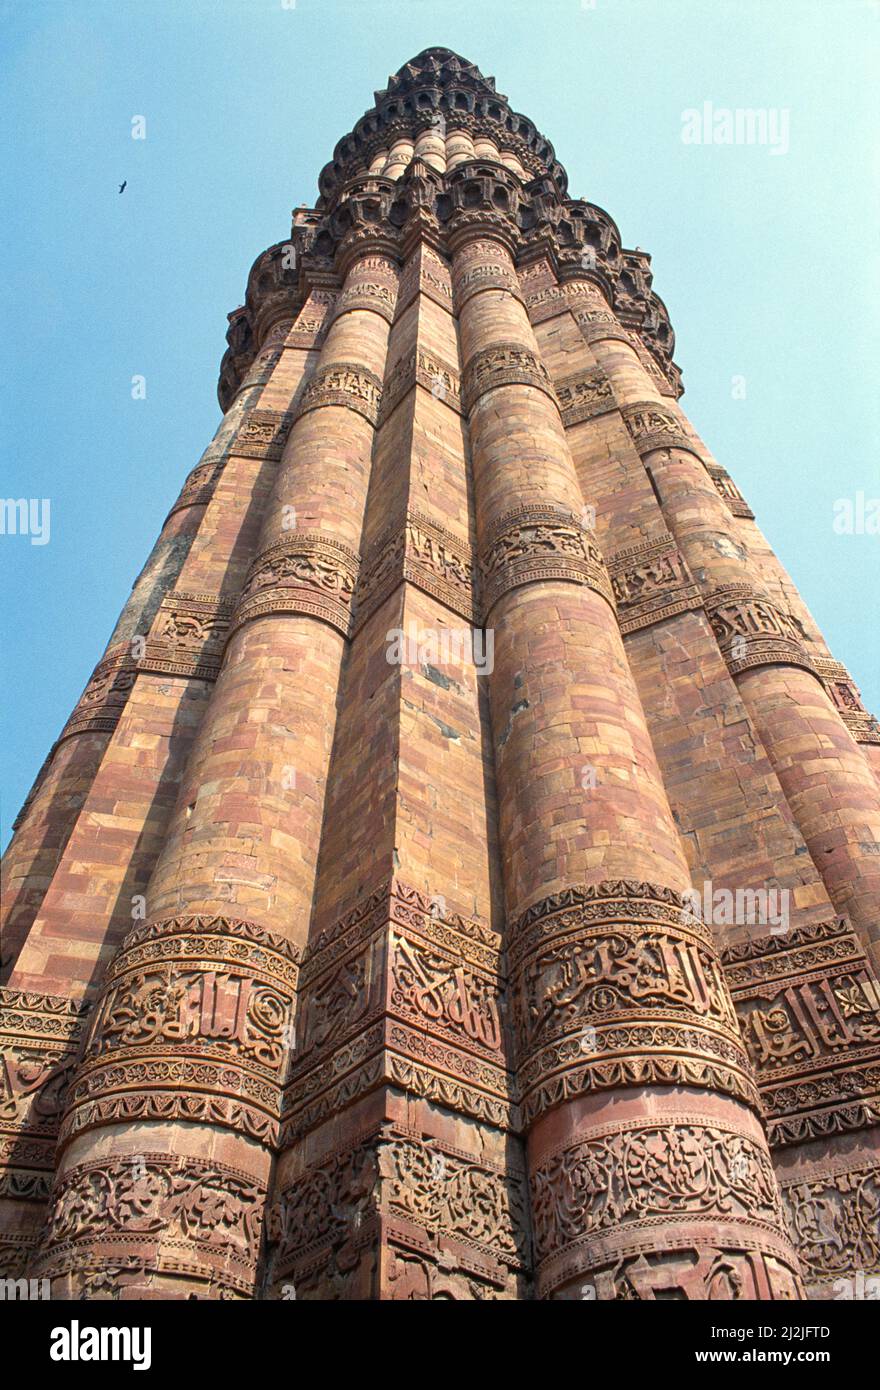 India. Delhi. Qutb Minar. Low viewpoint close up of the carved stone minar. Stock Photo